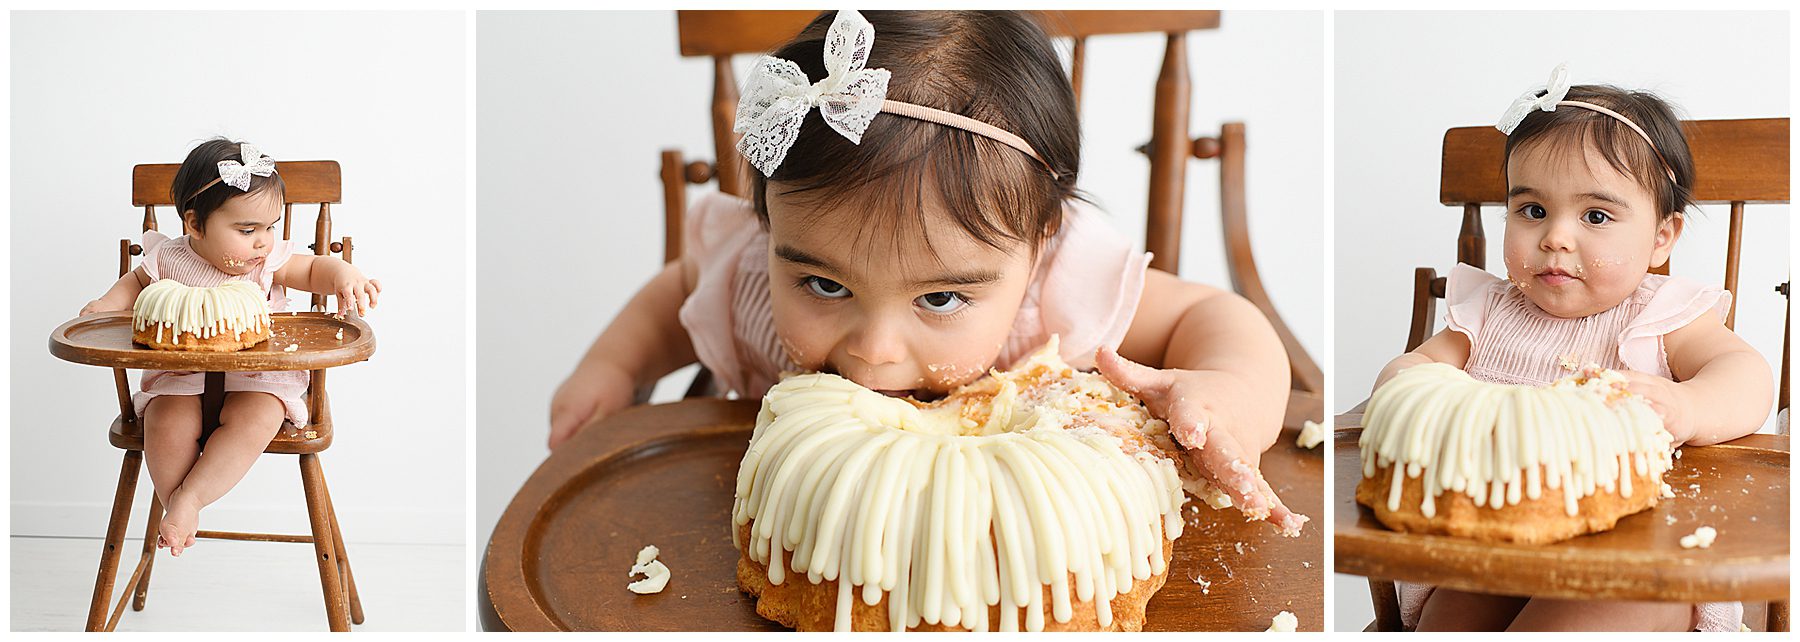 one year old baby in studio for a cake smash eating a bundt cake